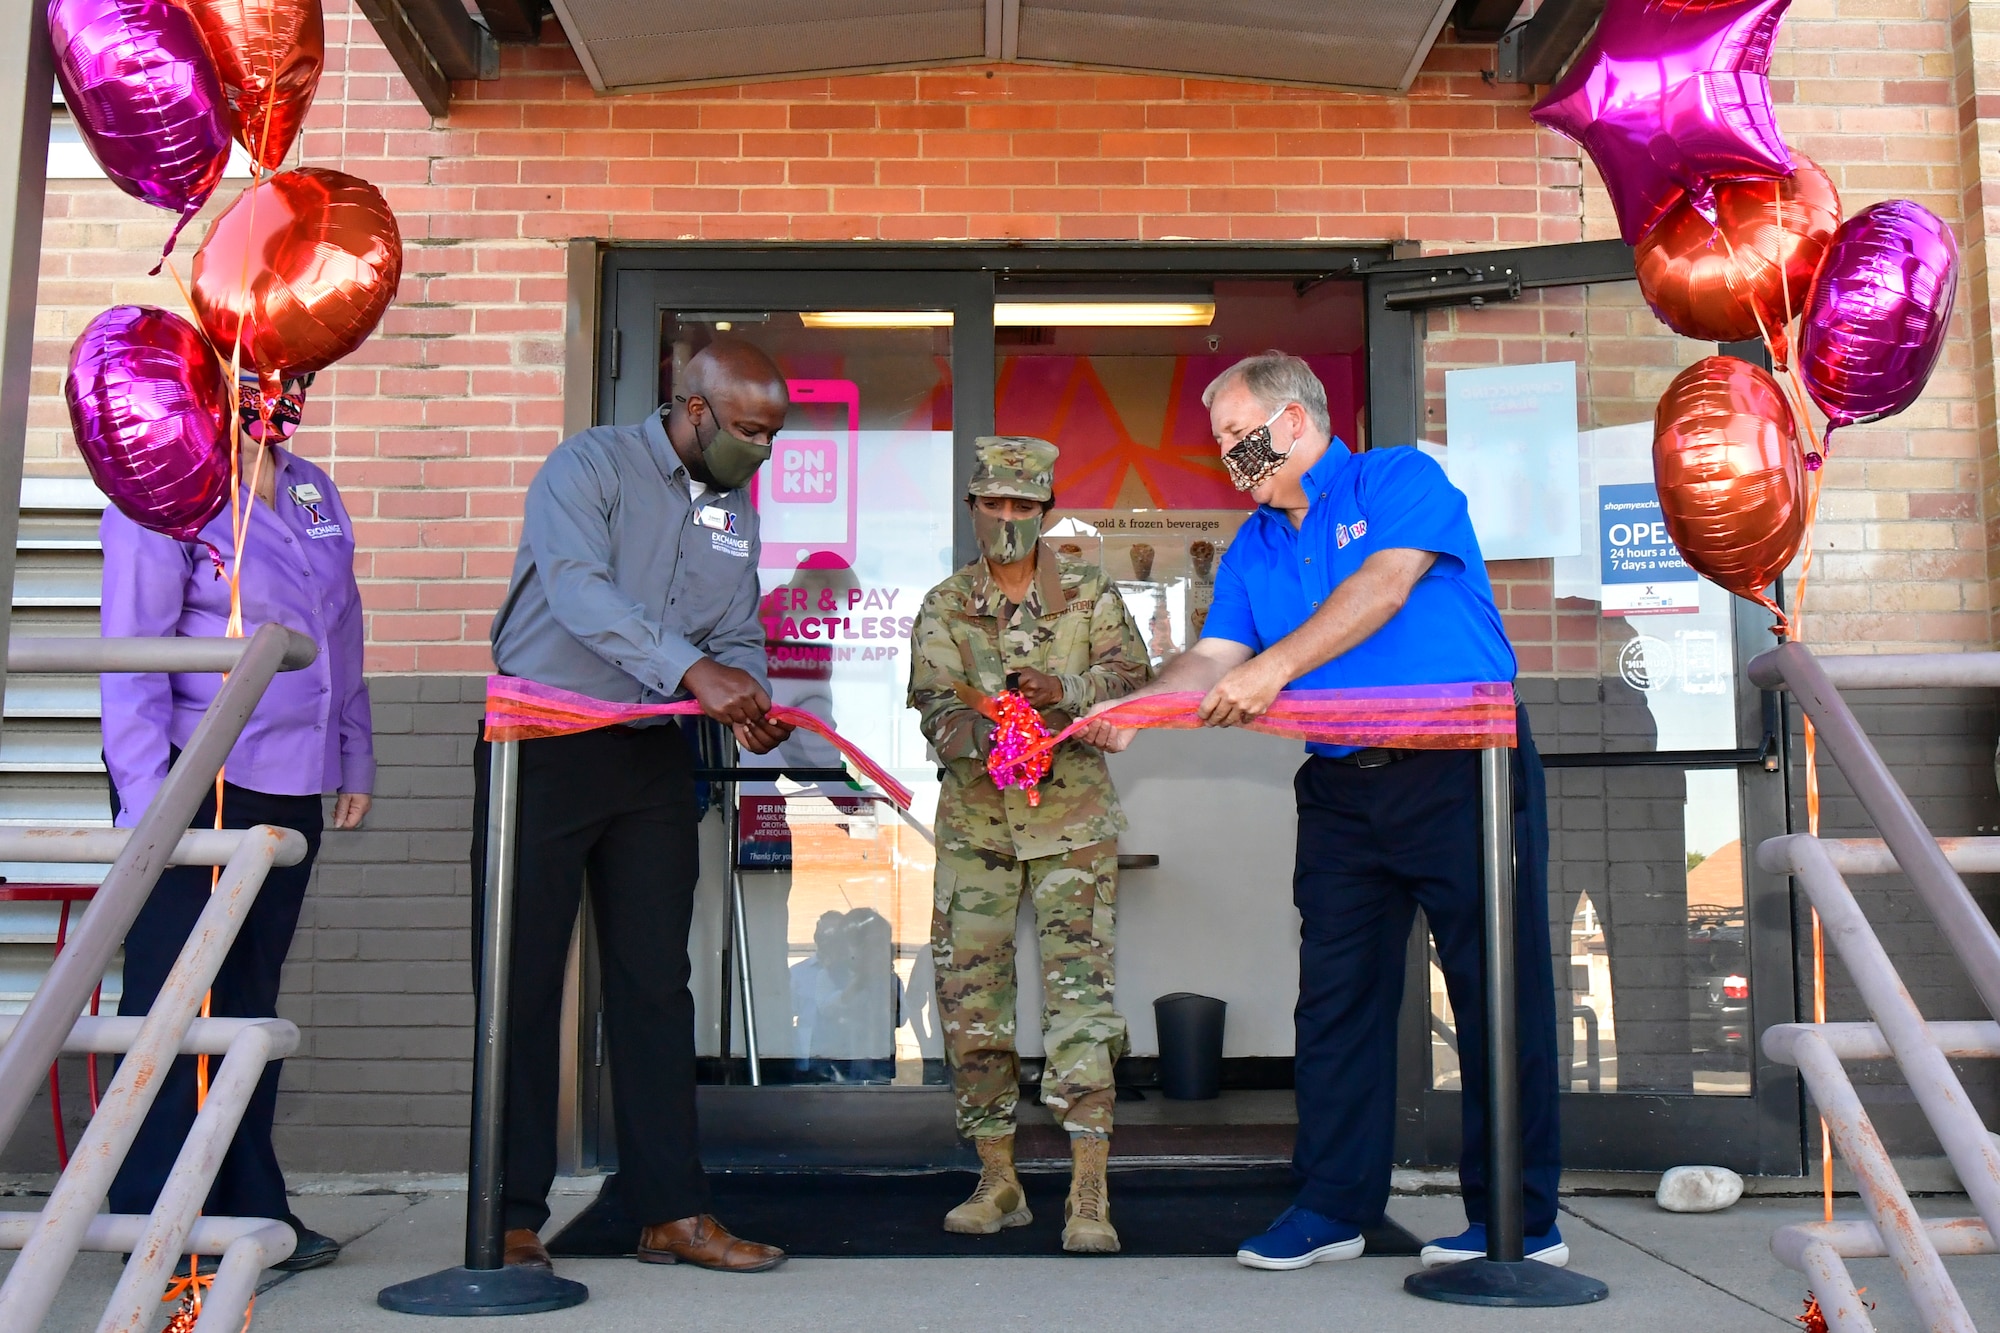 (Left to right) Edward James, Hill Exchange acting general manager, Col. Jenise Carroll, 75th Air Base Wing commander, and George Hart, Dunkin’ and Baskin-Robbins franchisee, cut the ribbon in front of Dunkin’ Donuts and Baskin-Robbins.